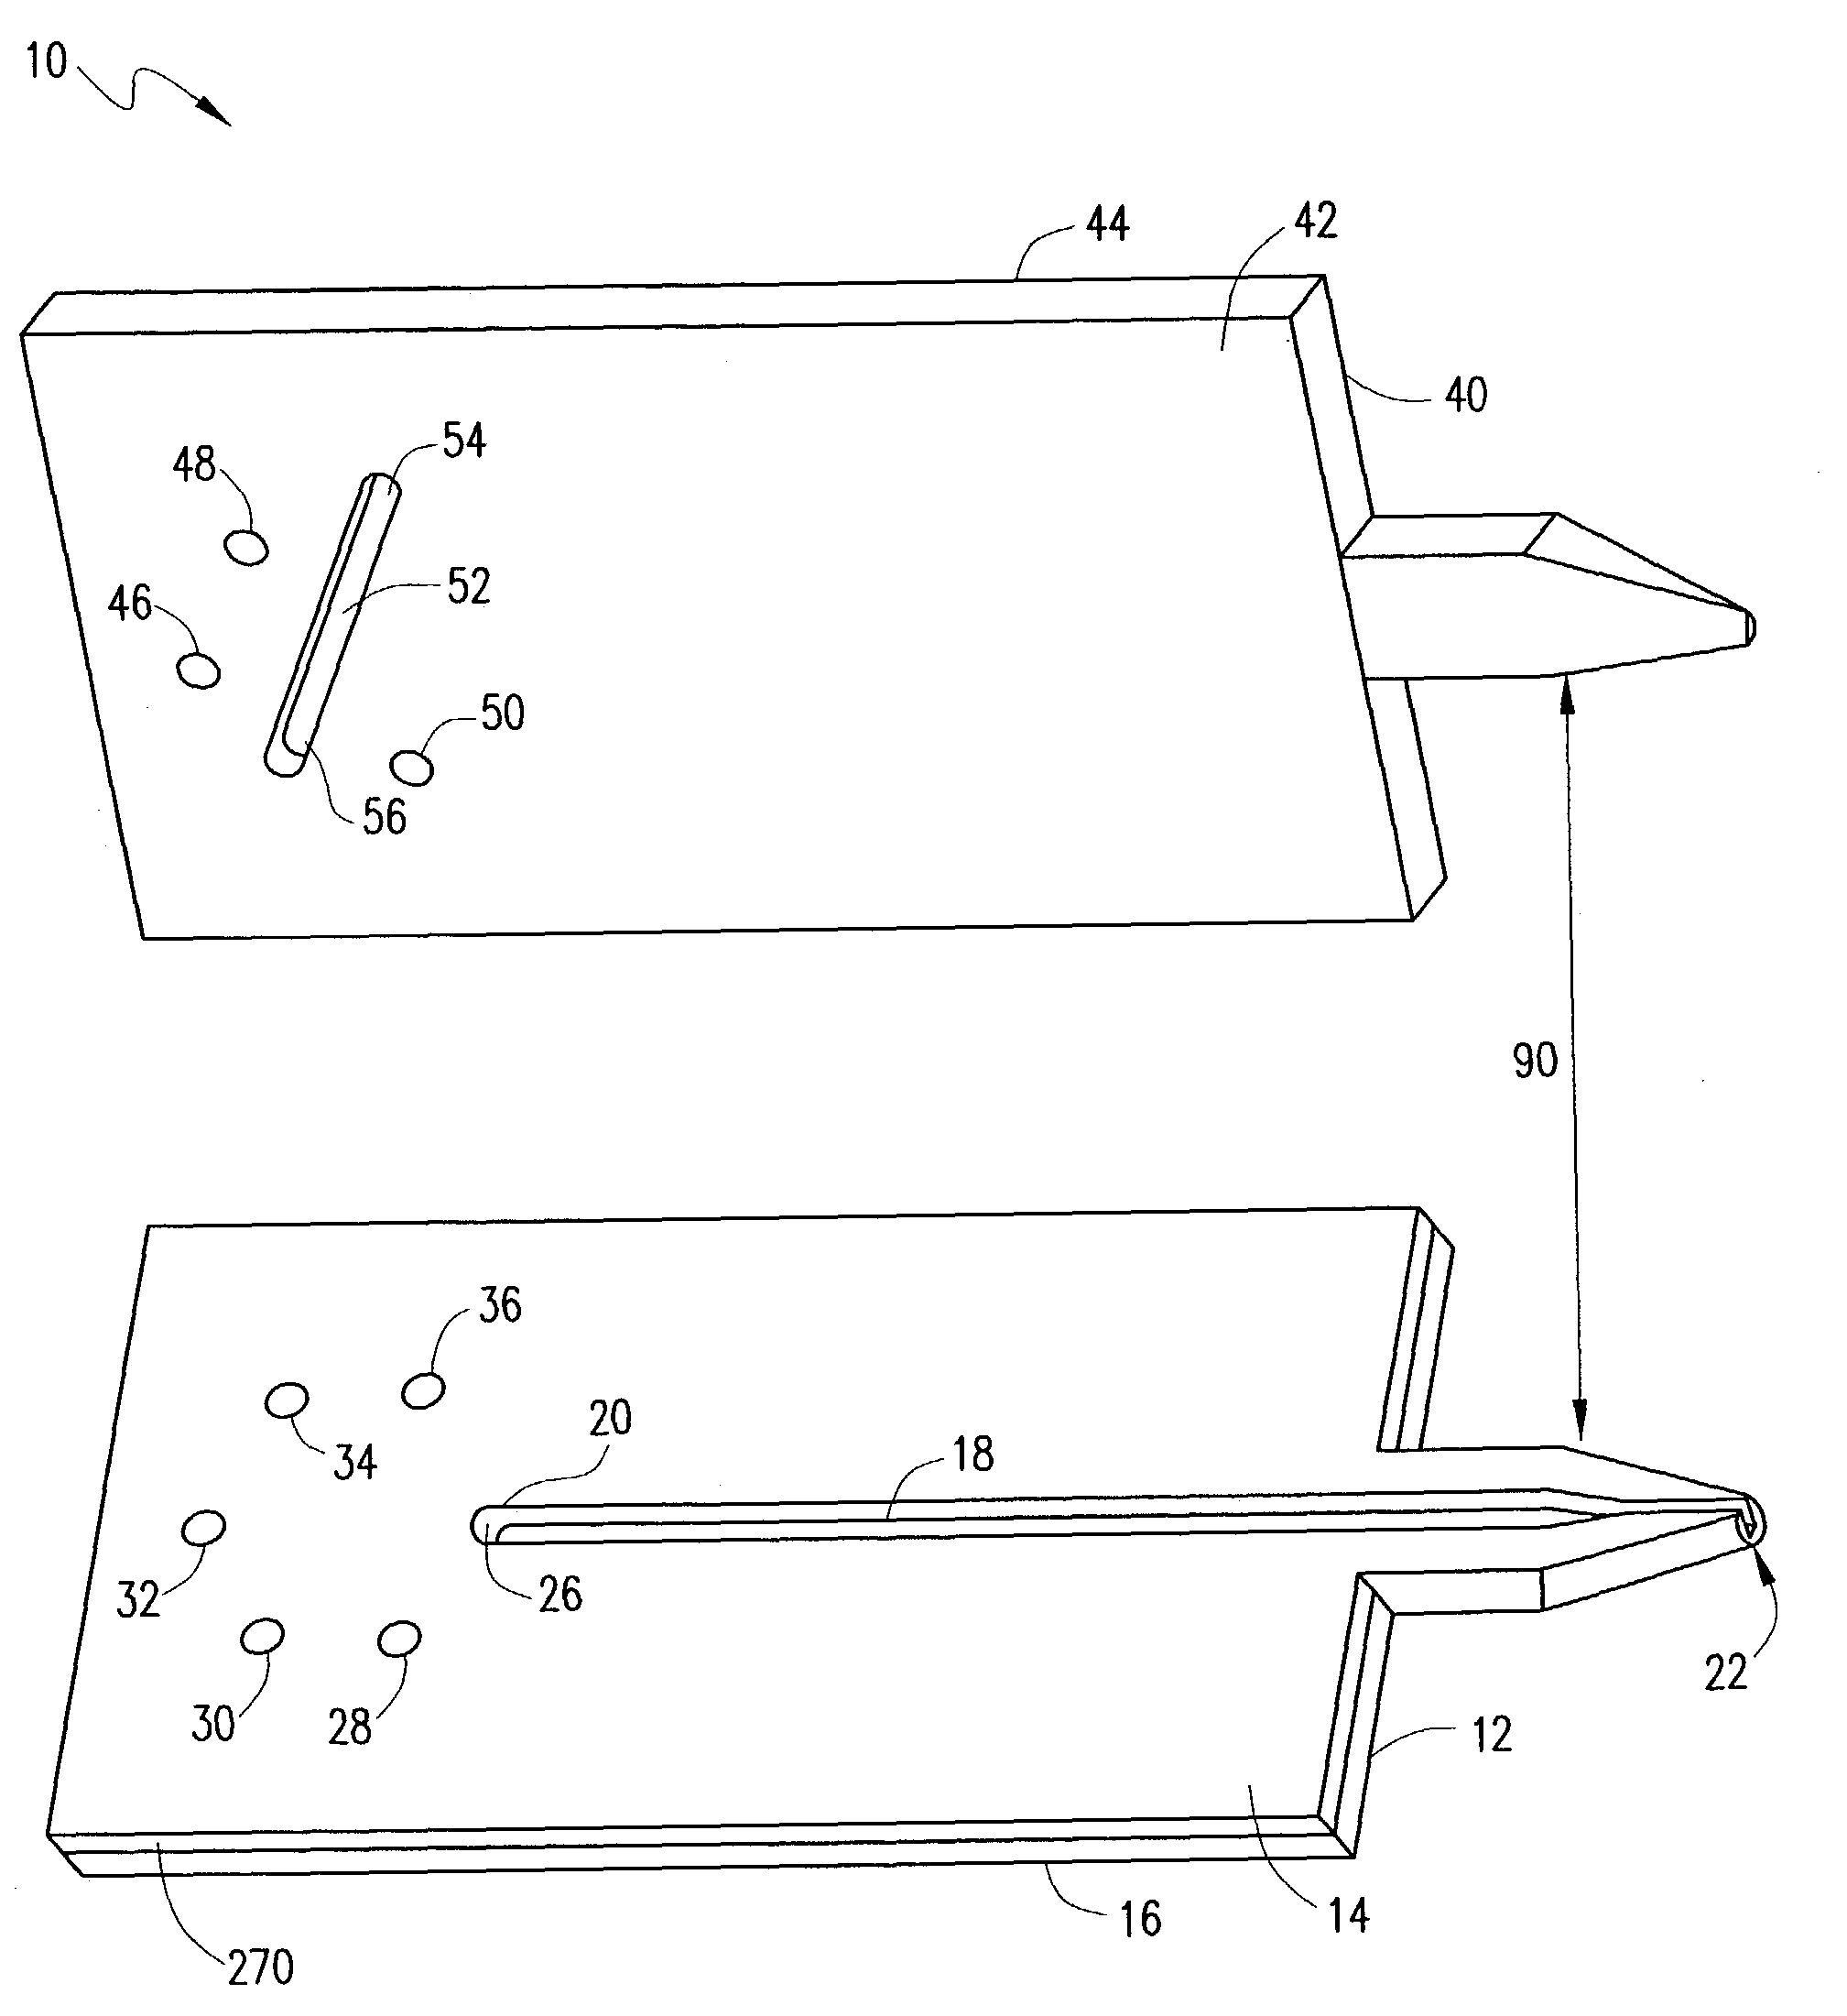 PAEK-based microfluidic device with integrated electrospray emitter